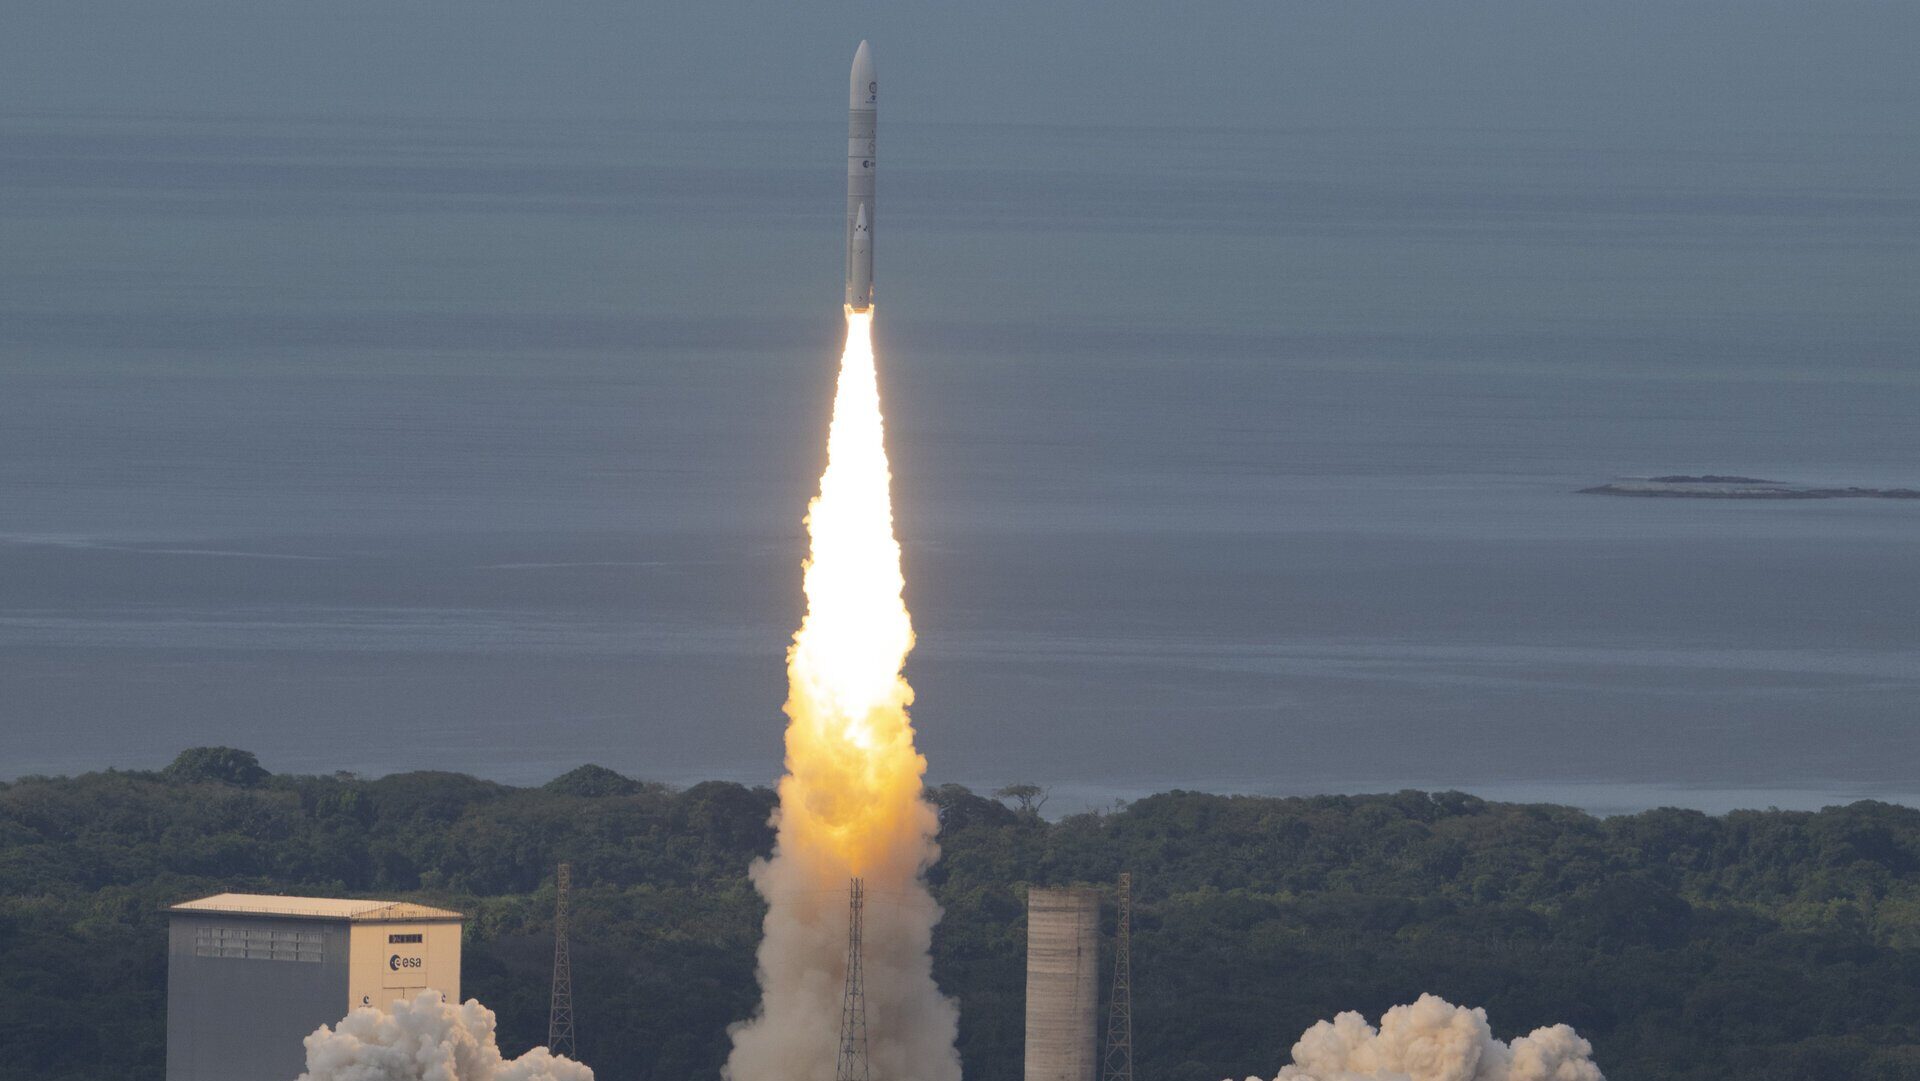 The Ariane 6 rocket launching from the European Spaceport in French Guiana